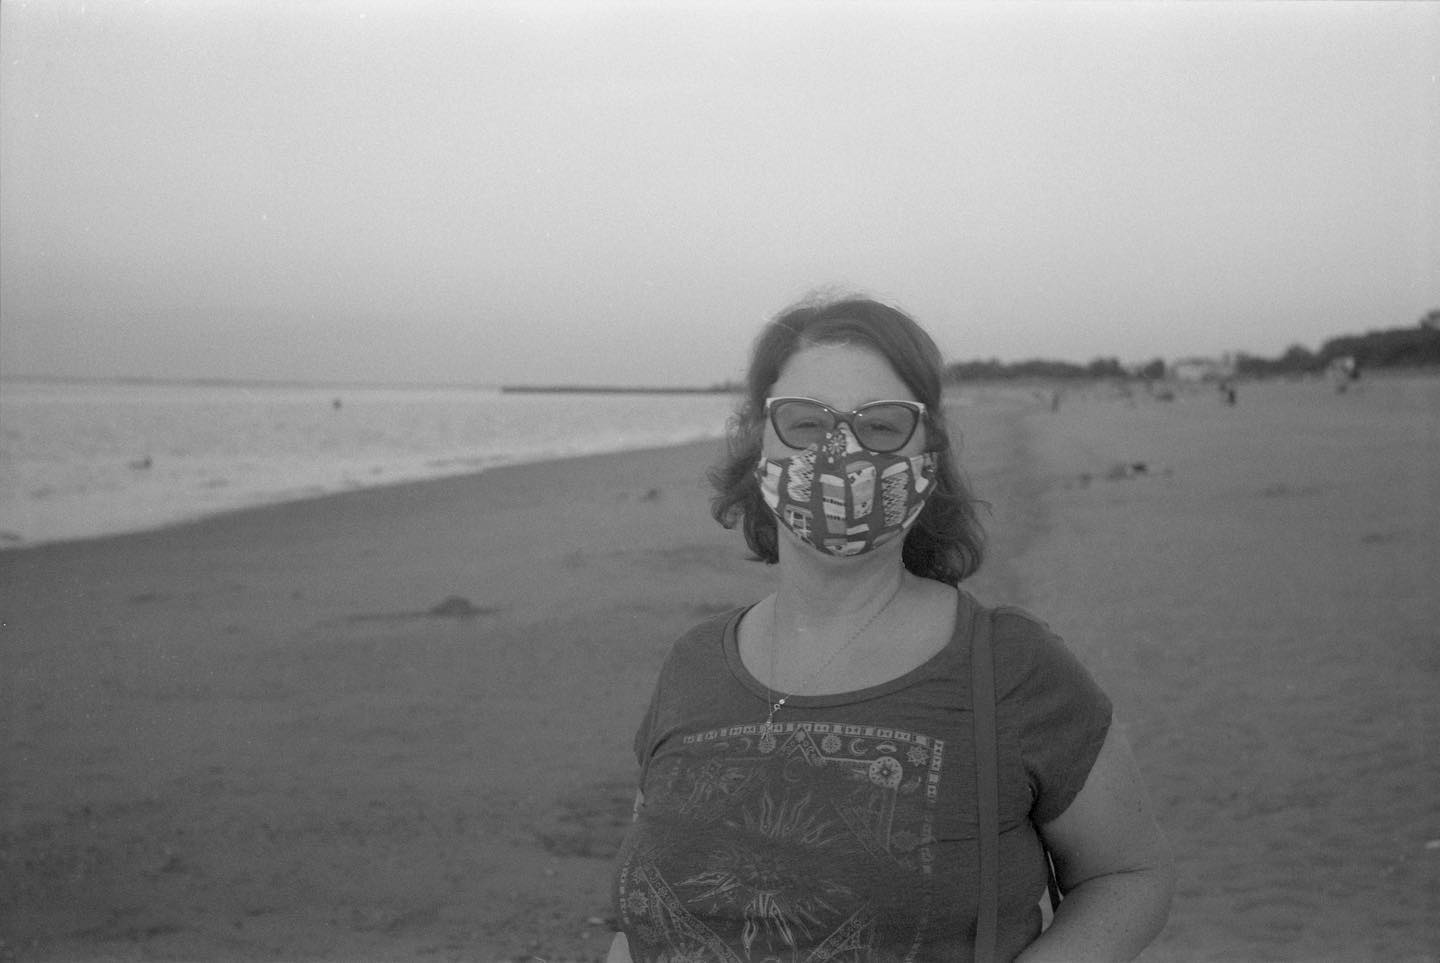 Wifey on the beach at sunset, in keeping with the theme today of portraits and selfies. #rollfilmweek #rollfilmweek2020 #film #filmphotography #contaxiii